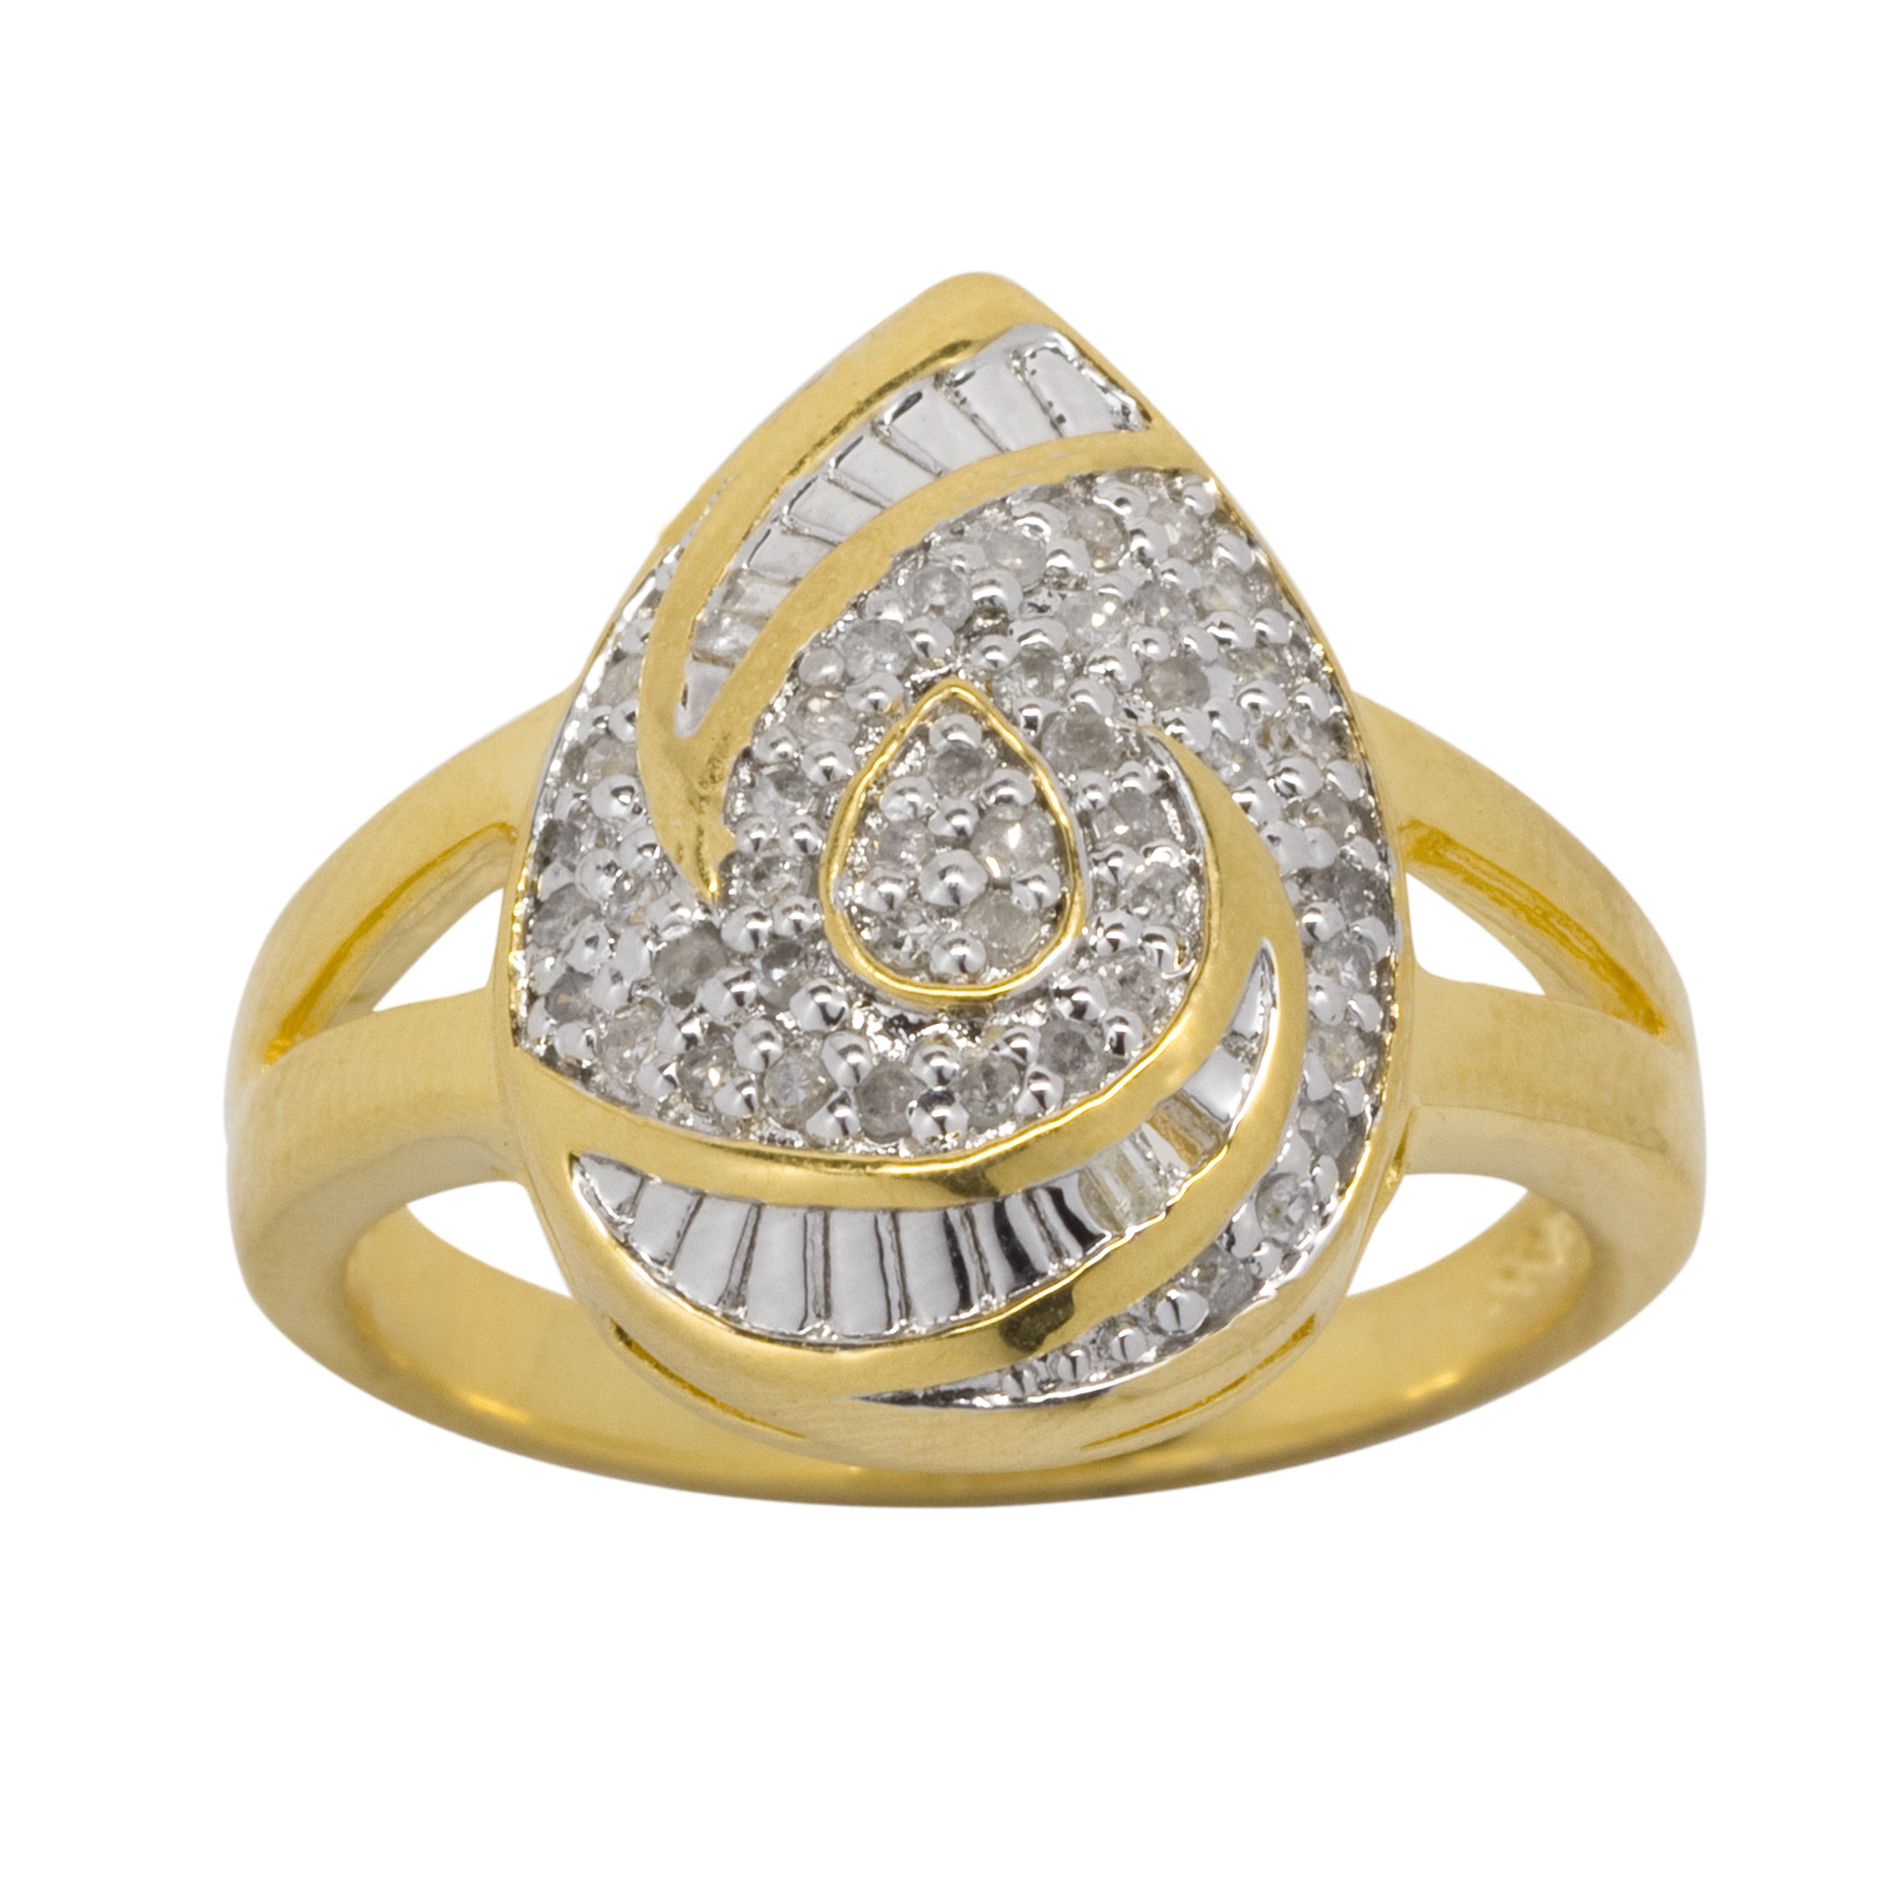 1/4cttw Diamond Ring in 18k Gold over Sterling Silver